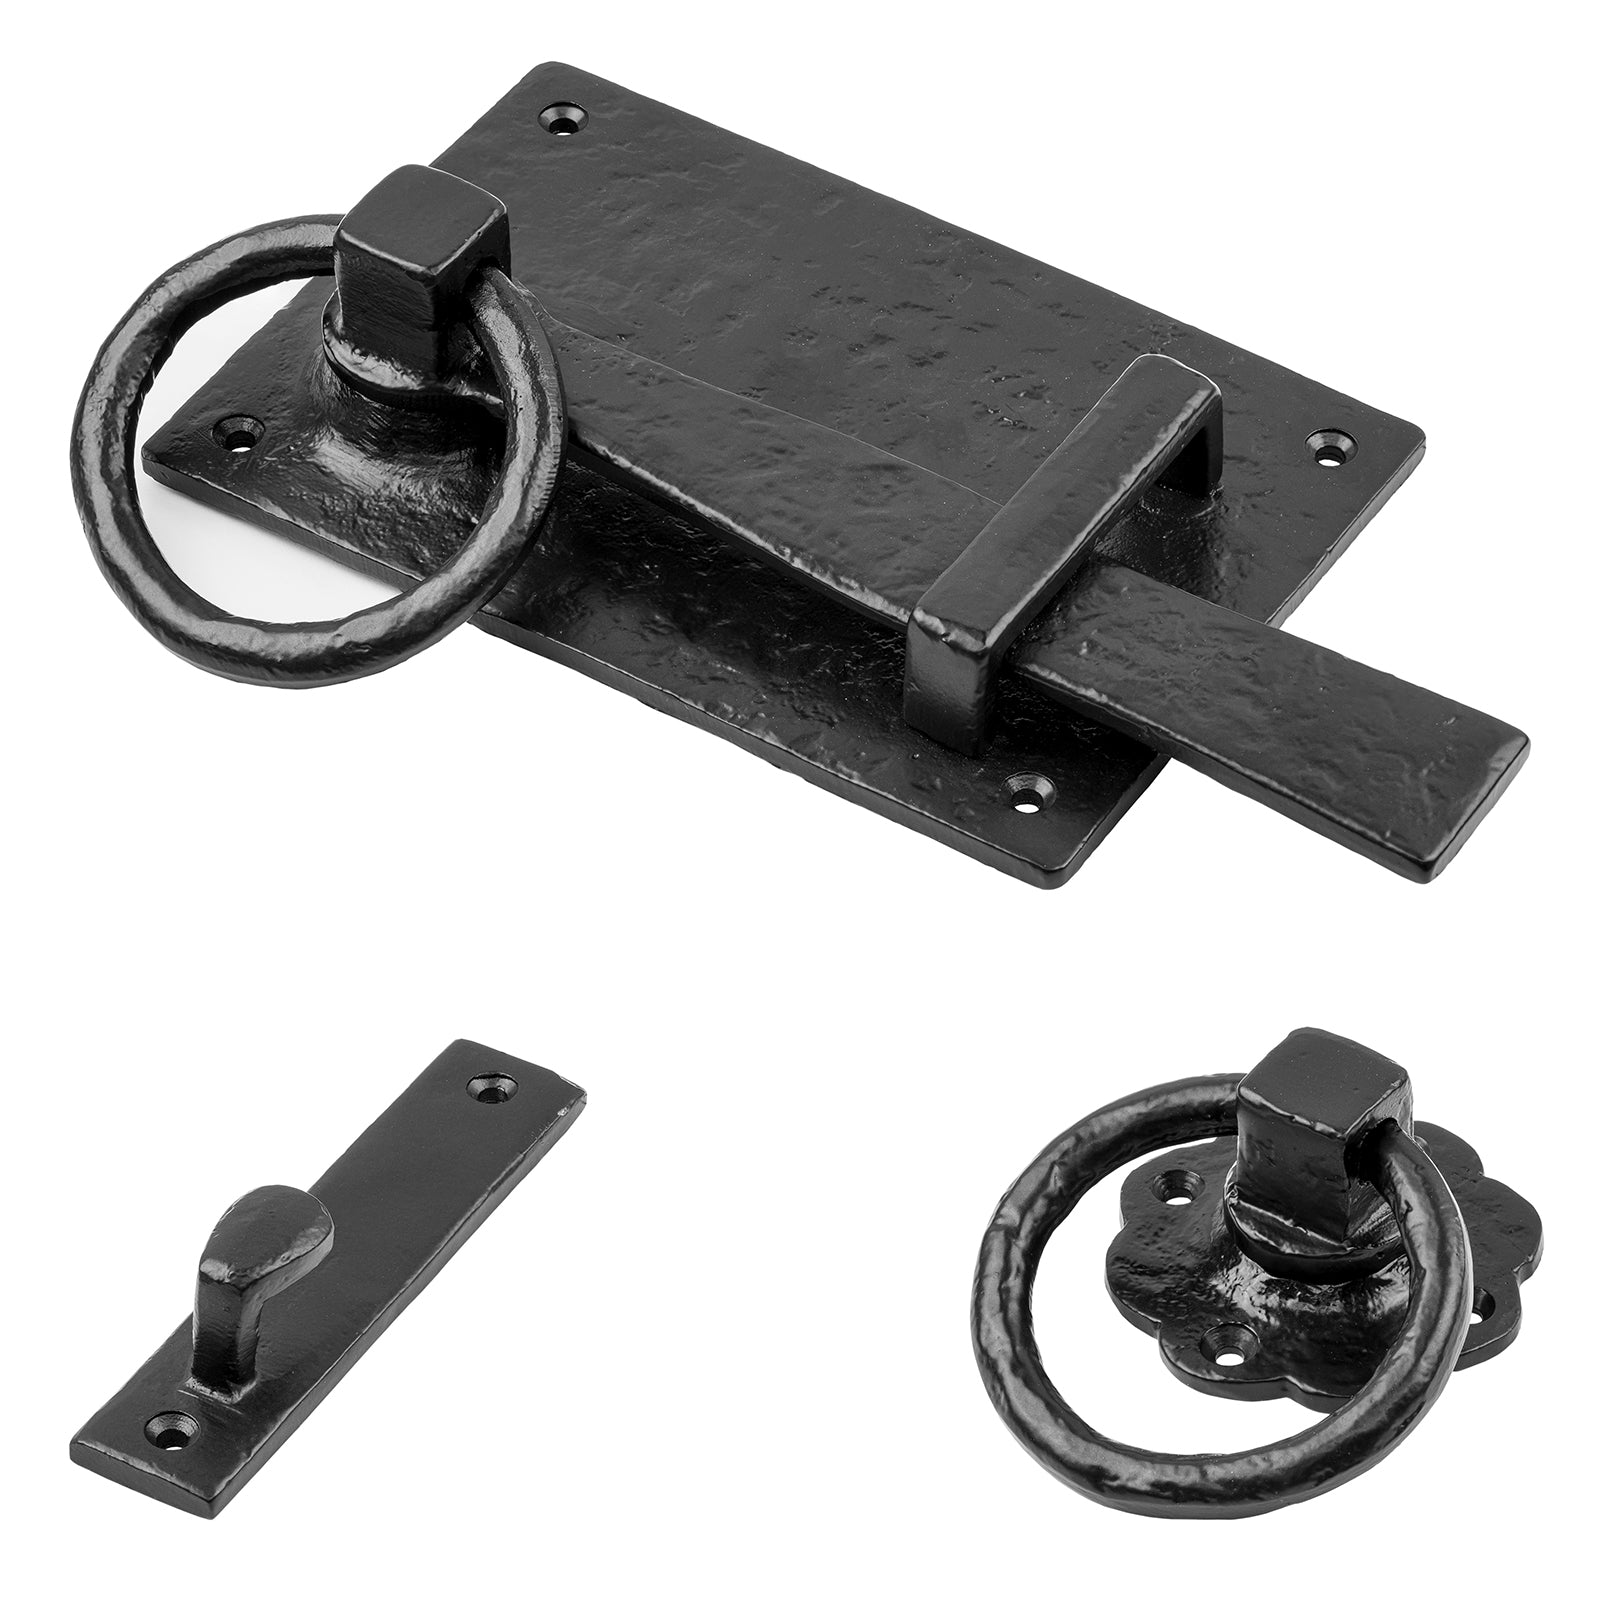 Tudor Cottage Gate Latch also known as a black door latch for your garden gate furniture